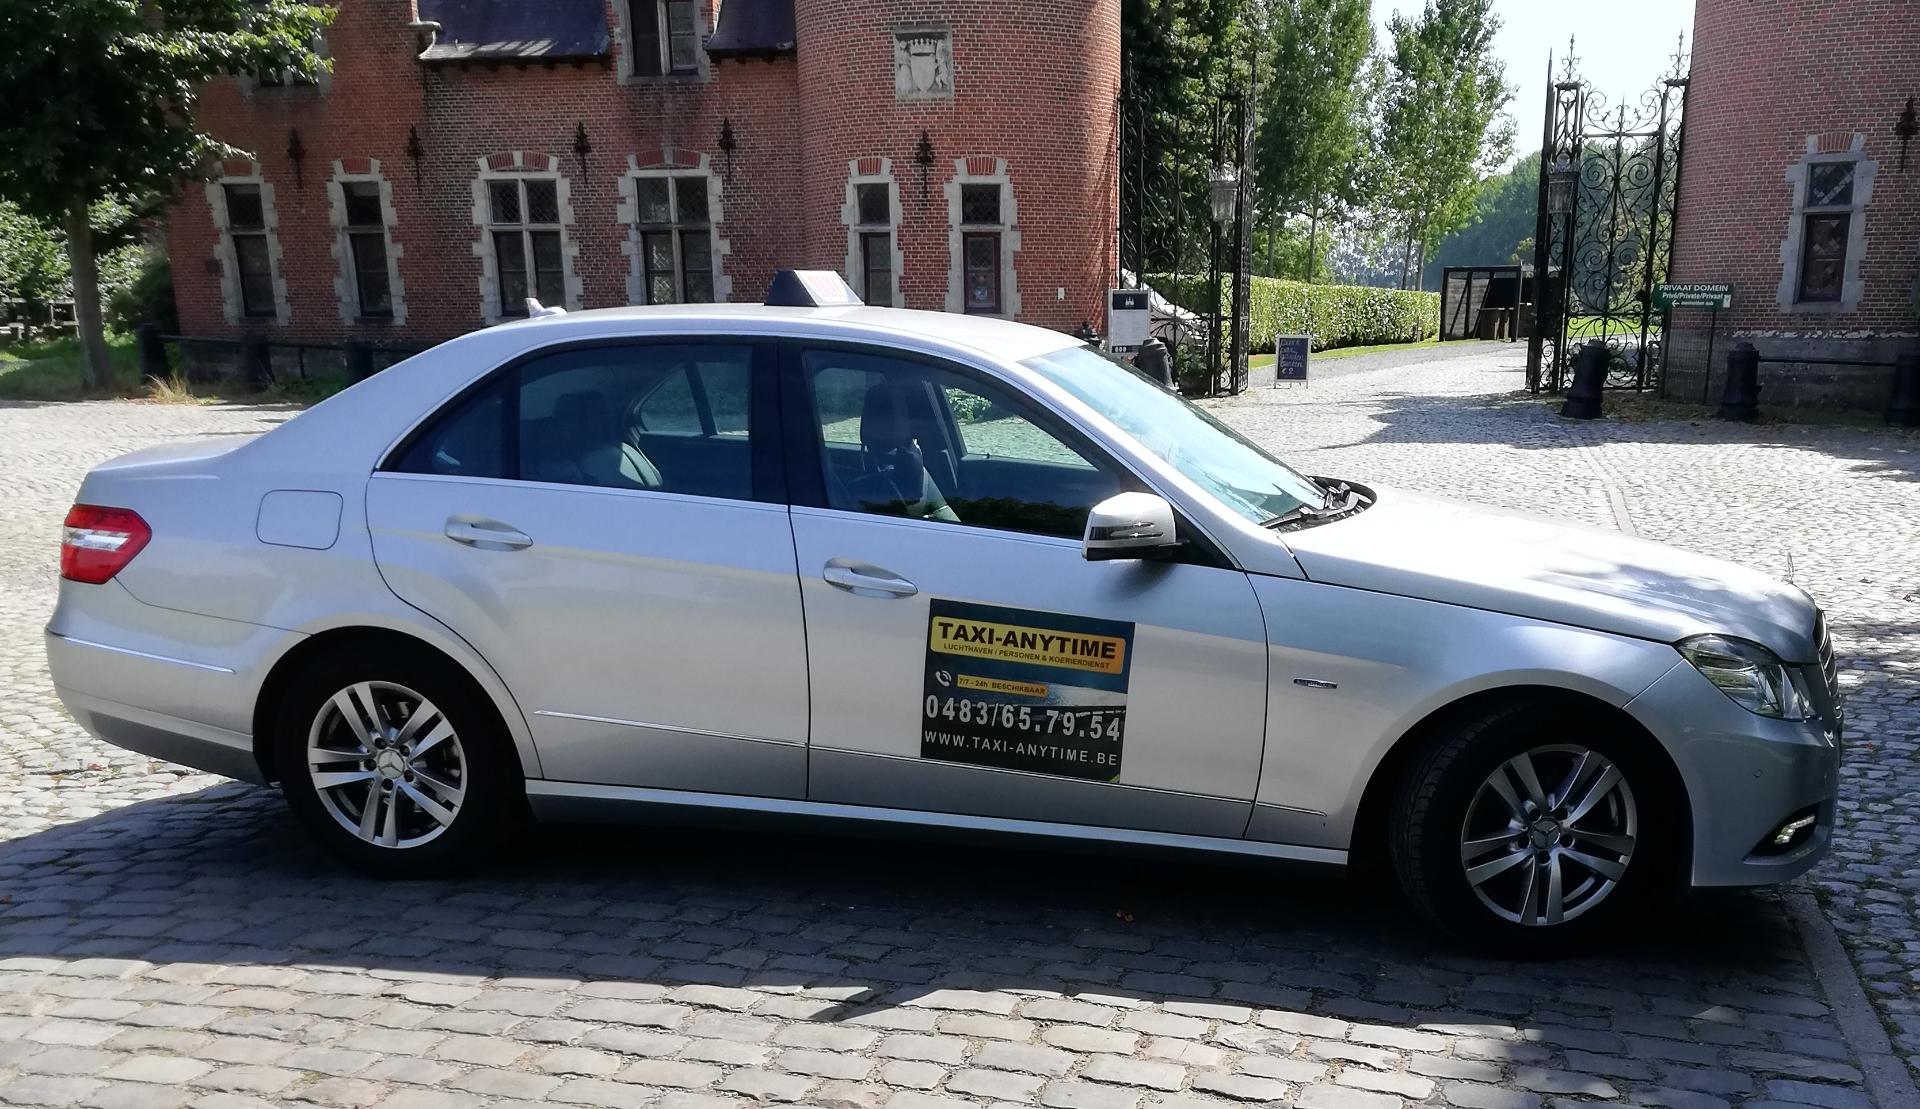 transportbedrijven Wichelen Taxi Anytime